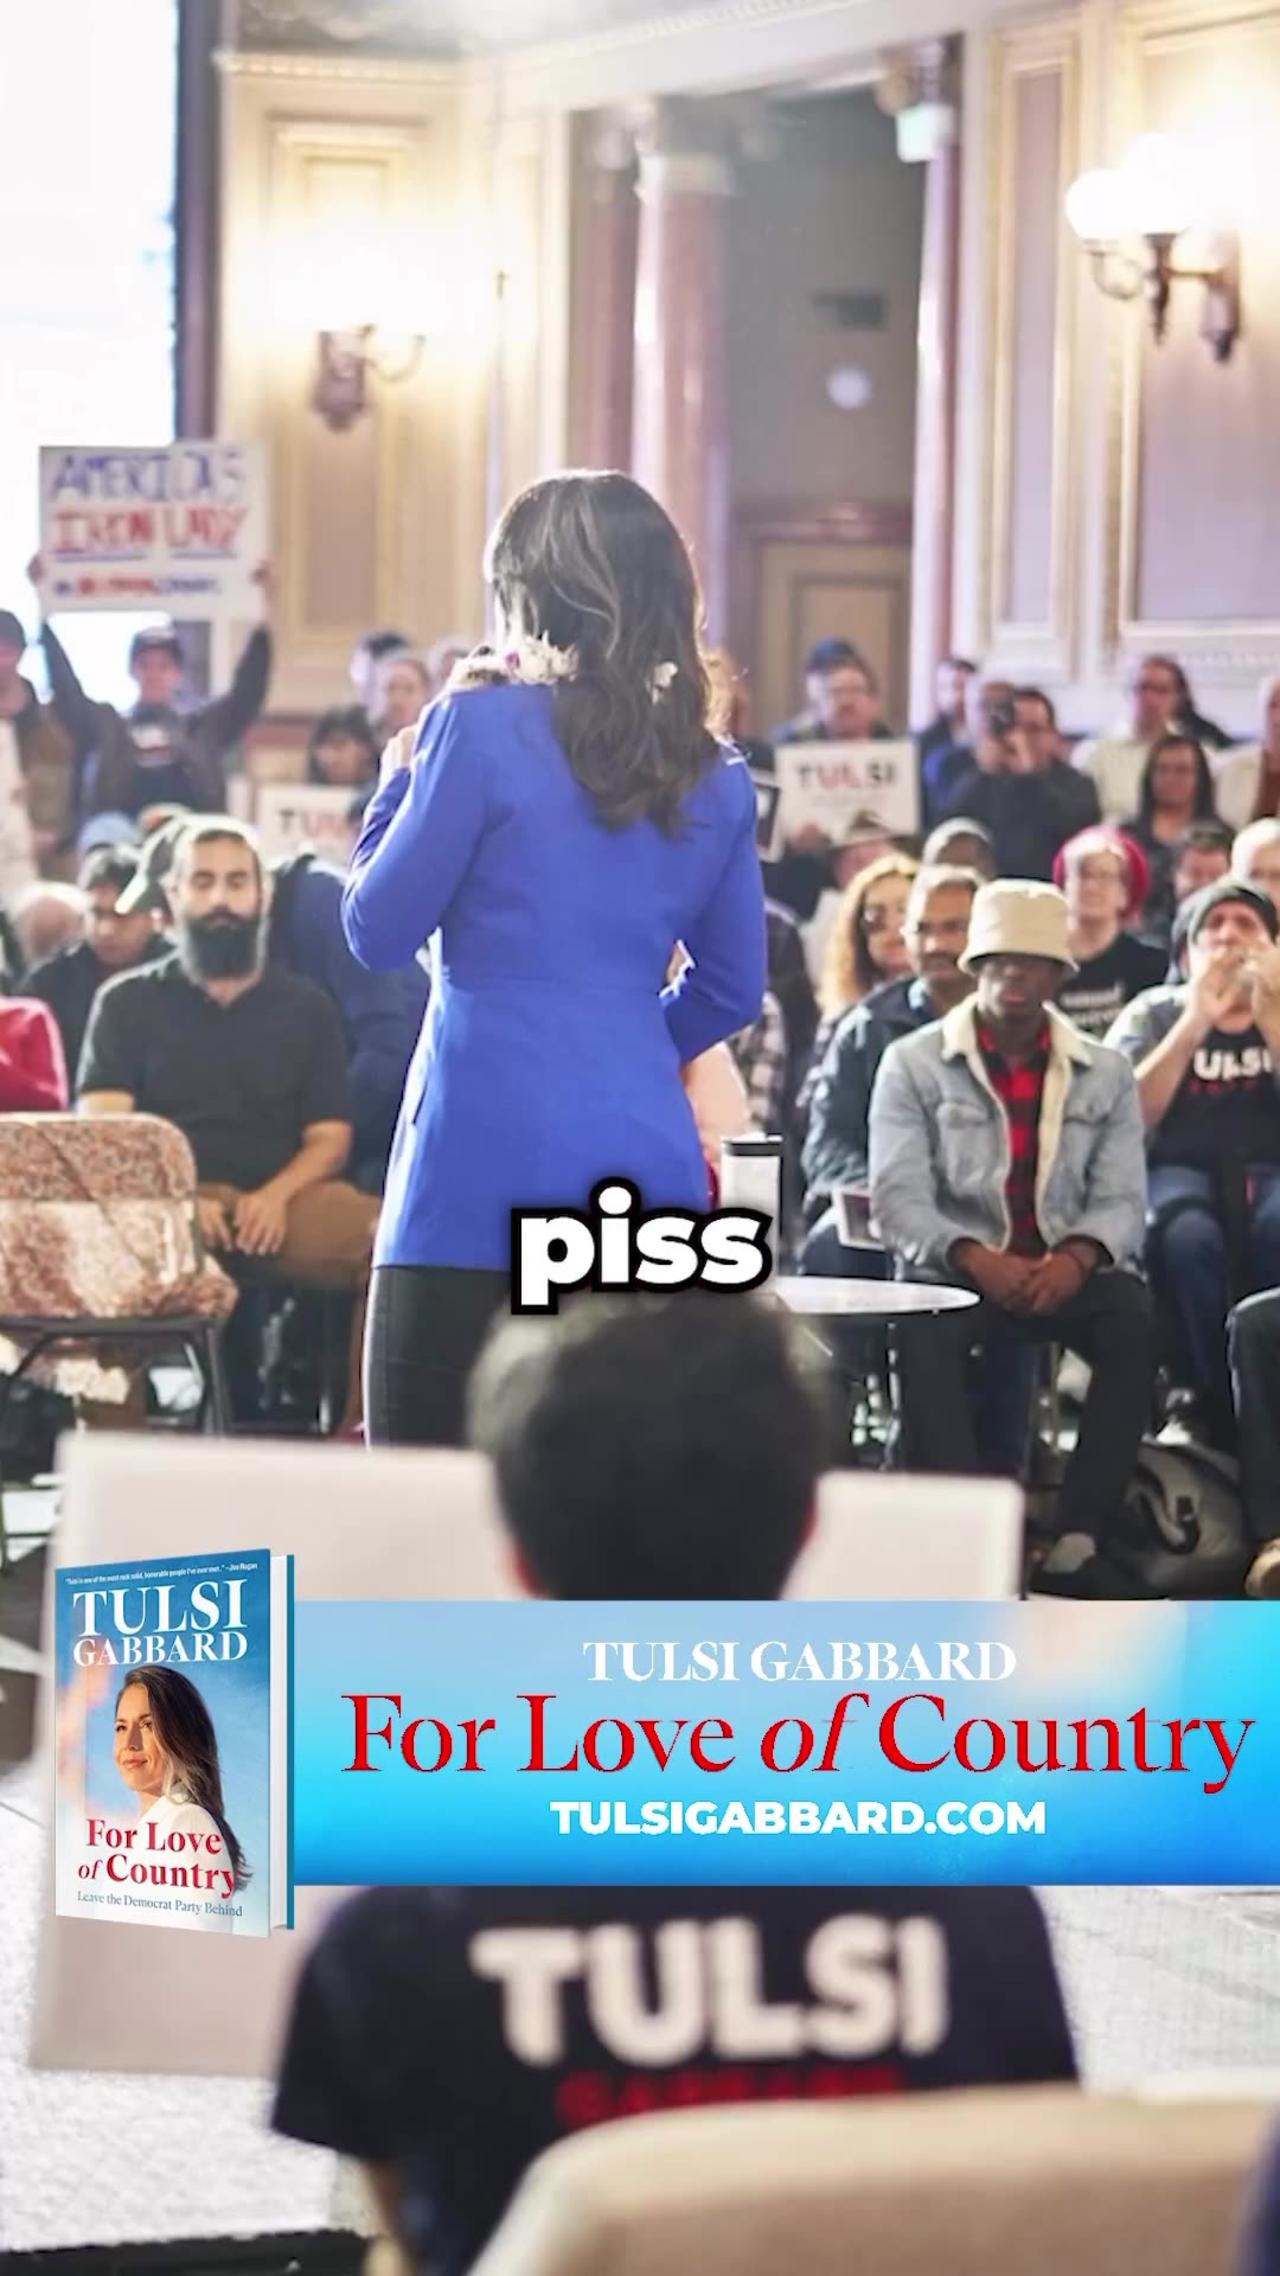 The beautiful US Lieutenant Colonel Tulsi Gabbard presents her book "For Love of Country".